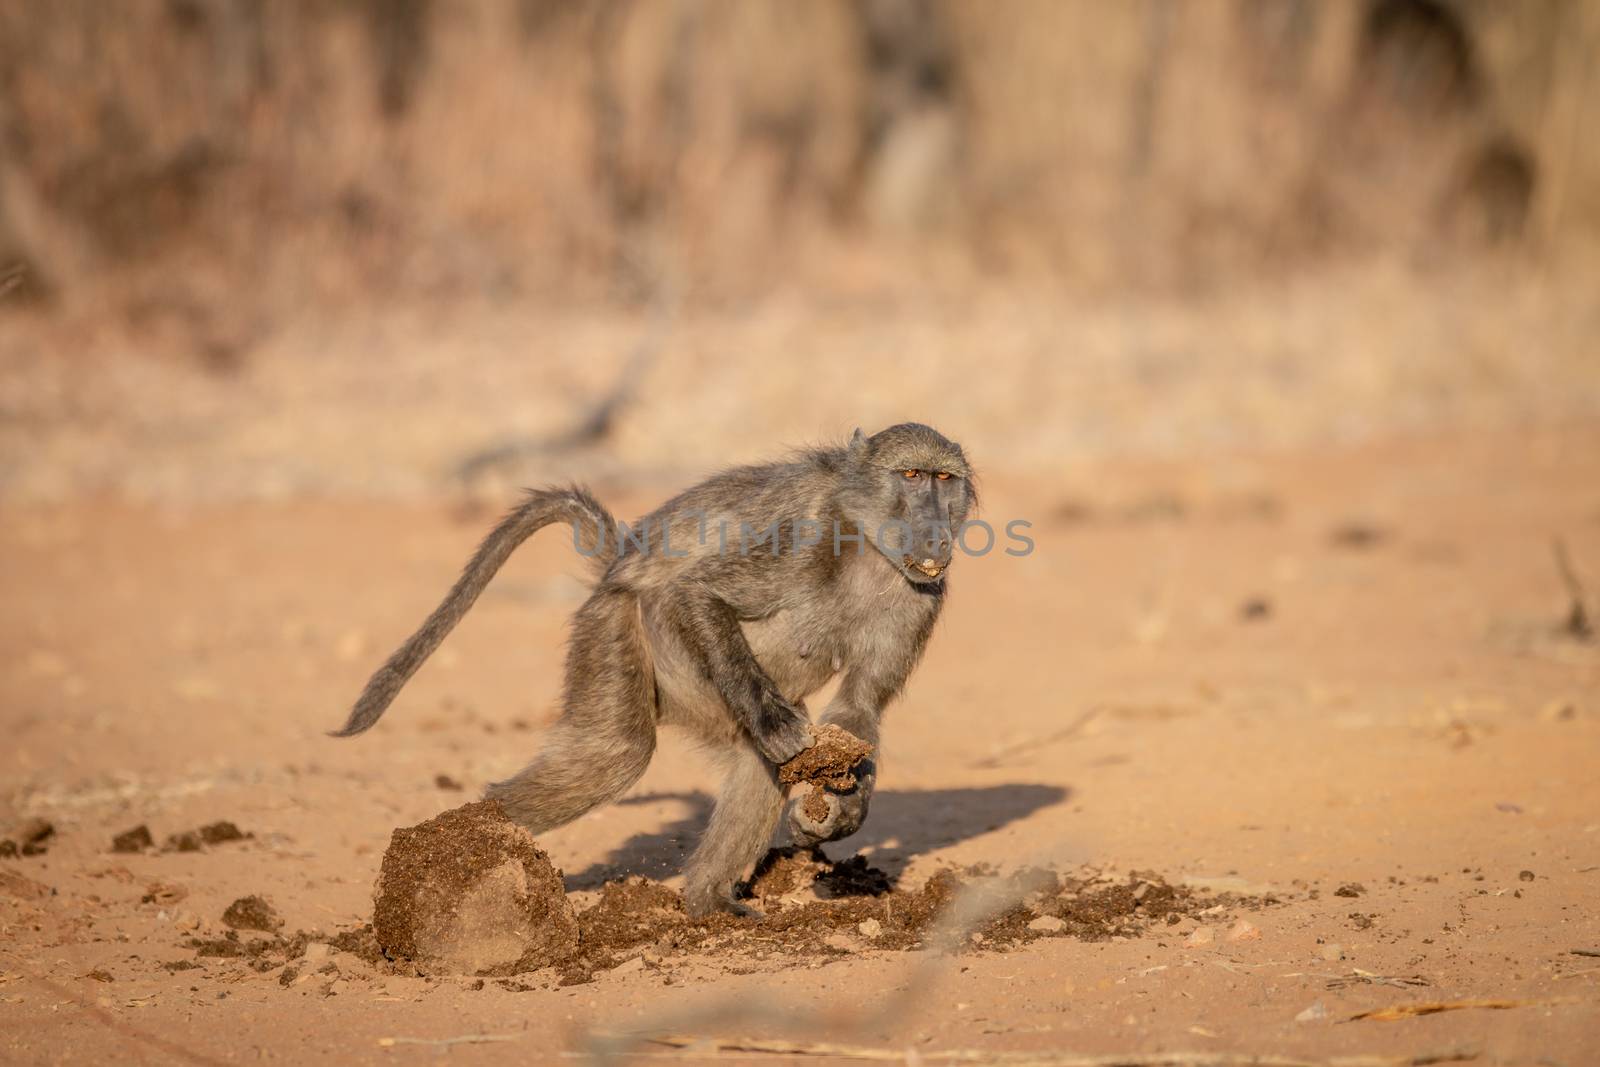 Chacma baboon running away with a block of food. by Simoneemanphotography